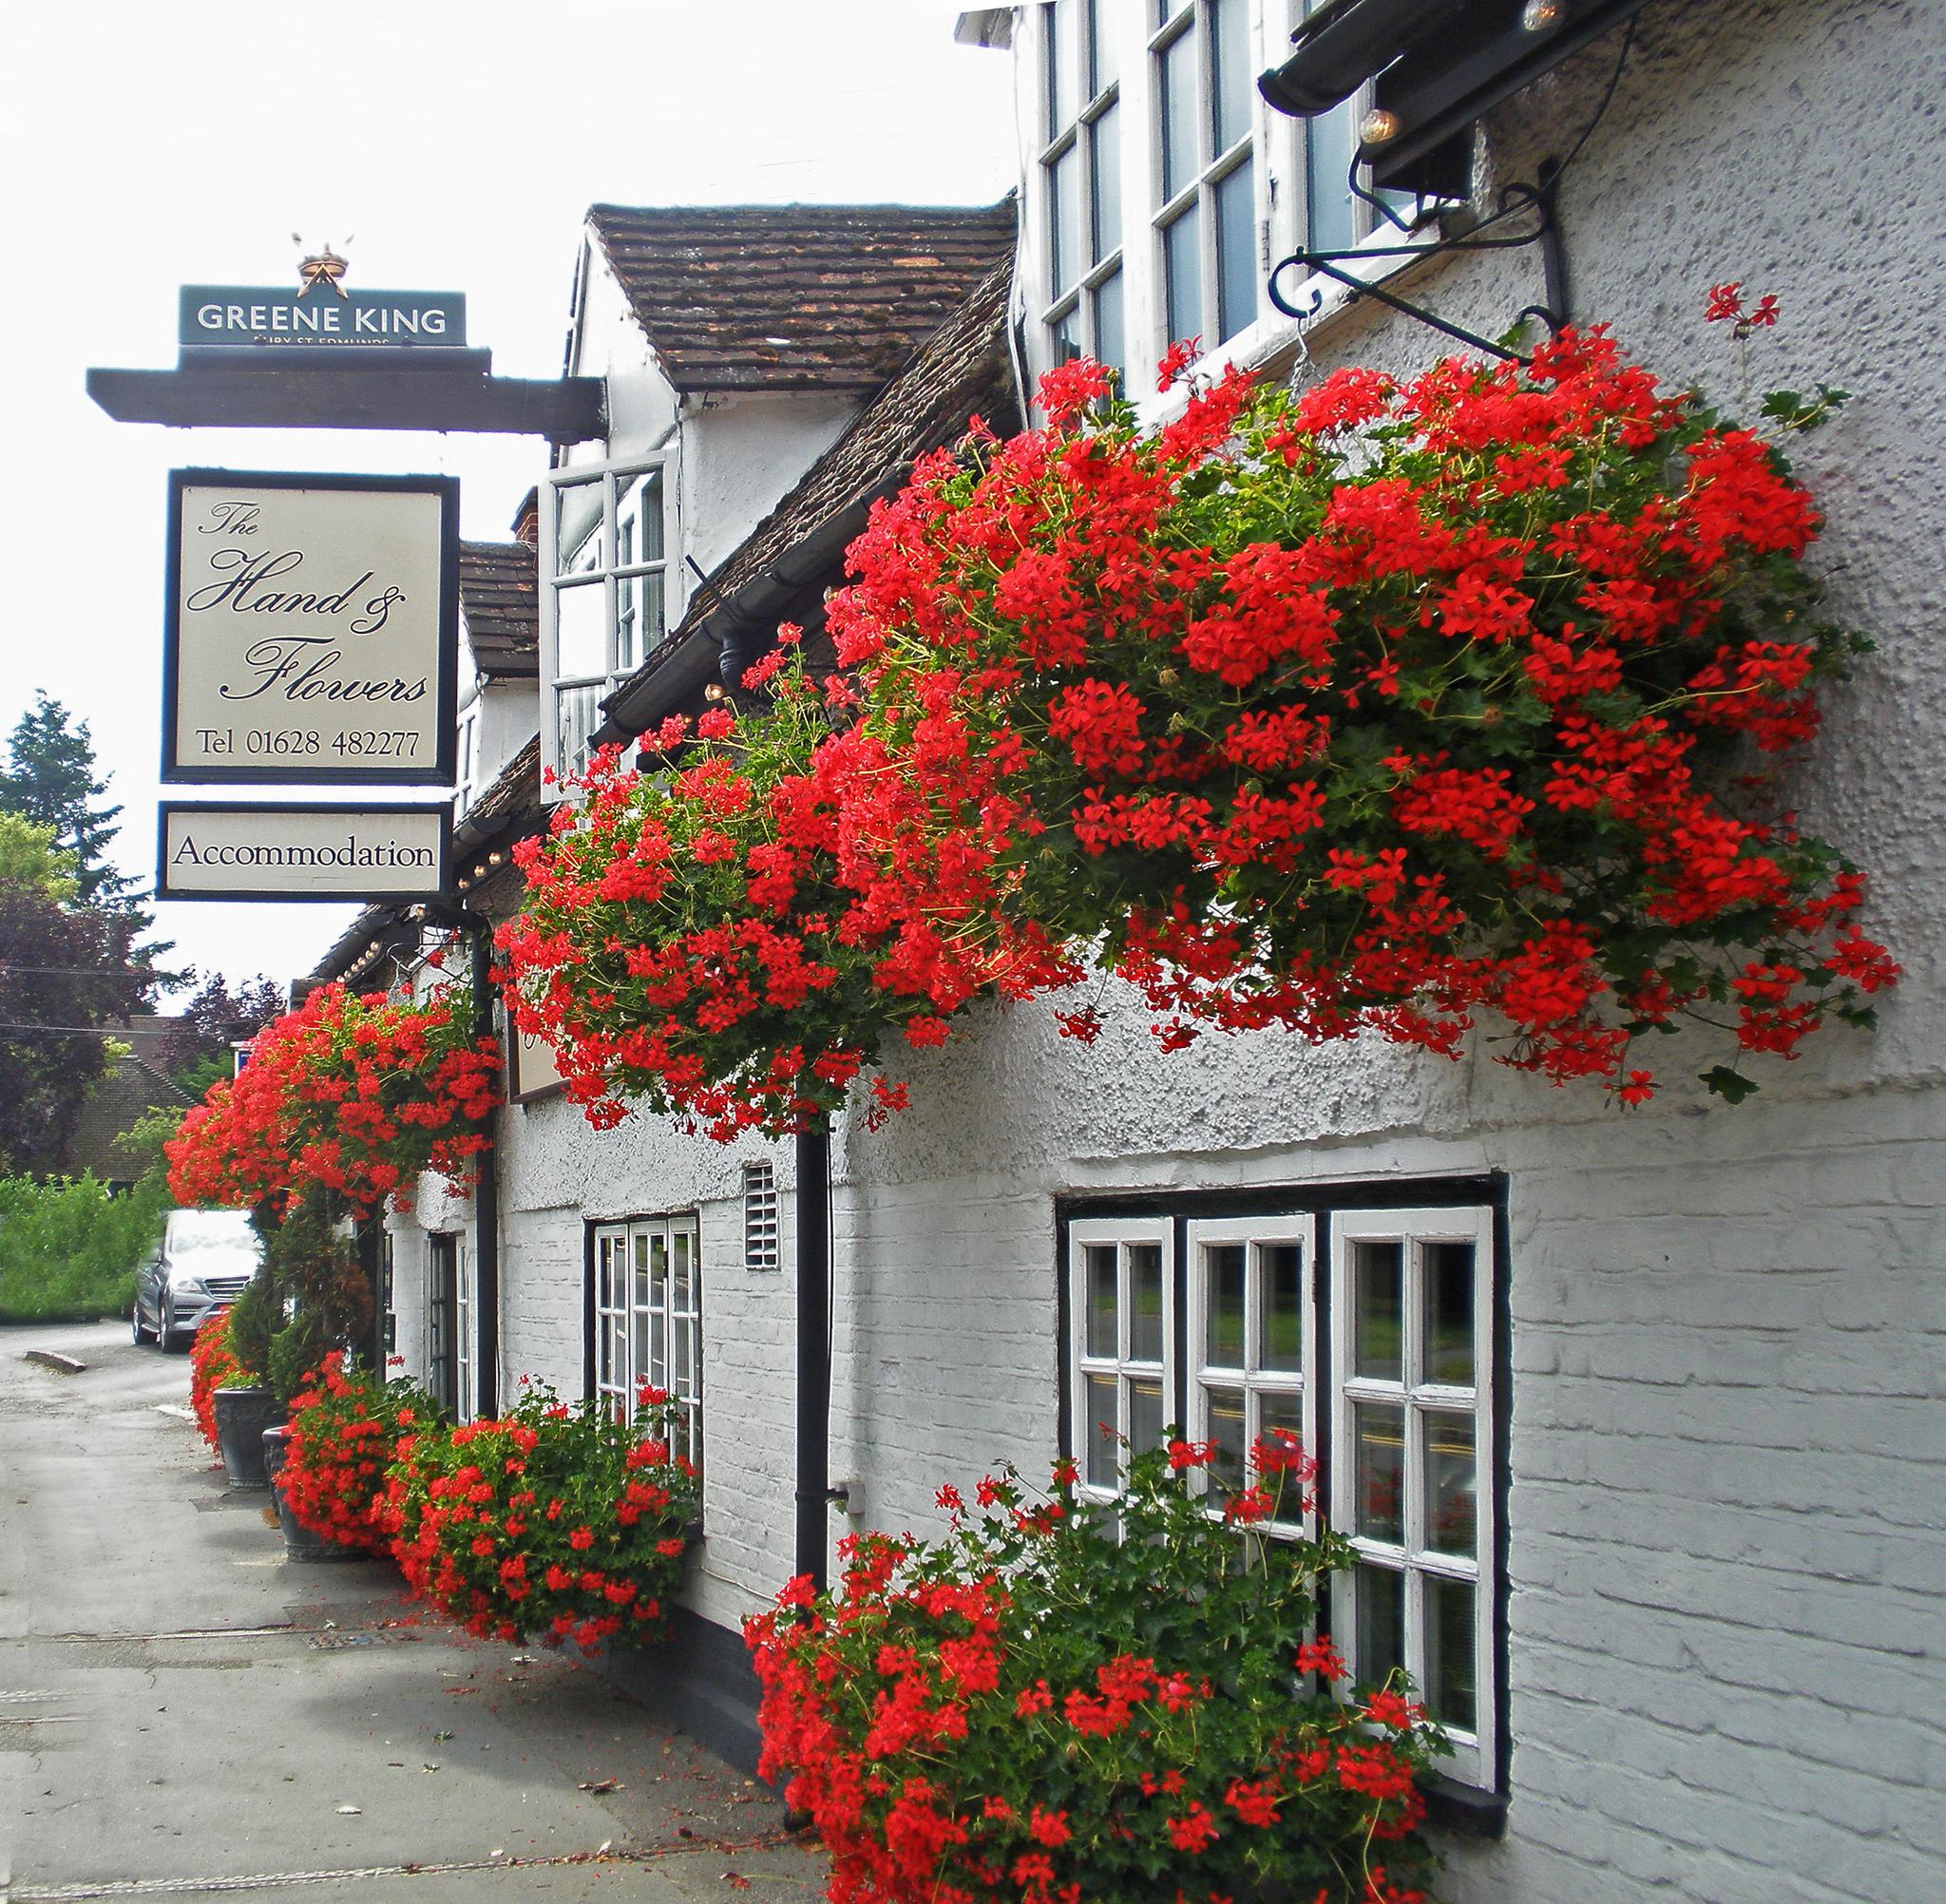 The Hand and Flowers in Marlow was the first pub in Britain to be awarded two Michelin stars